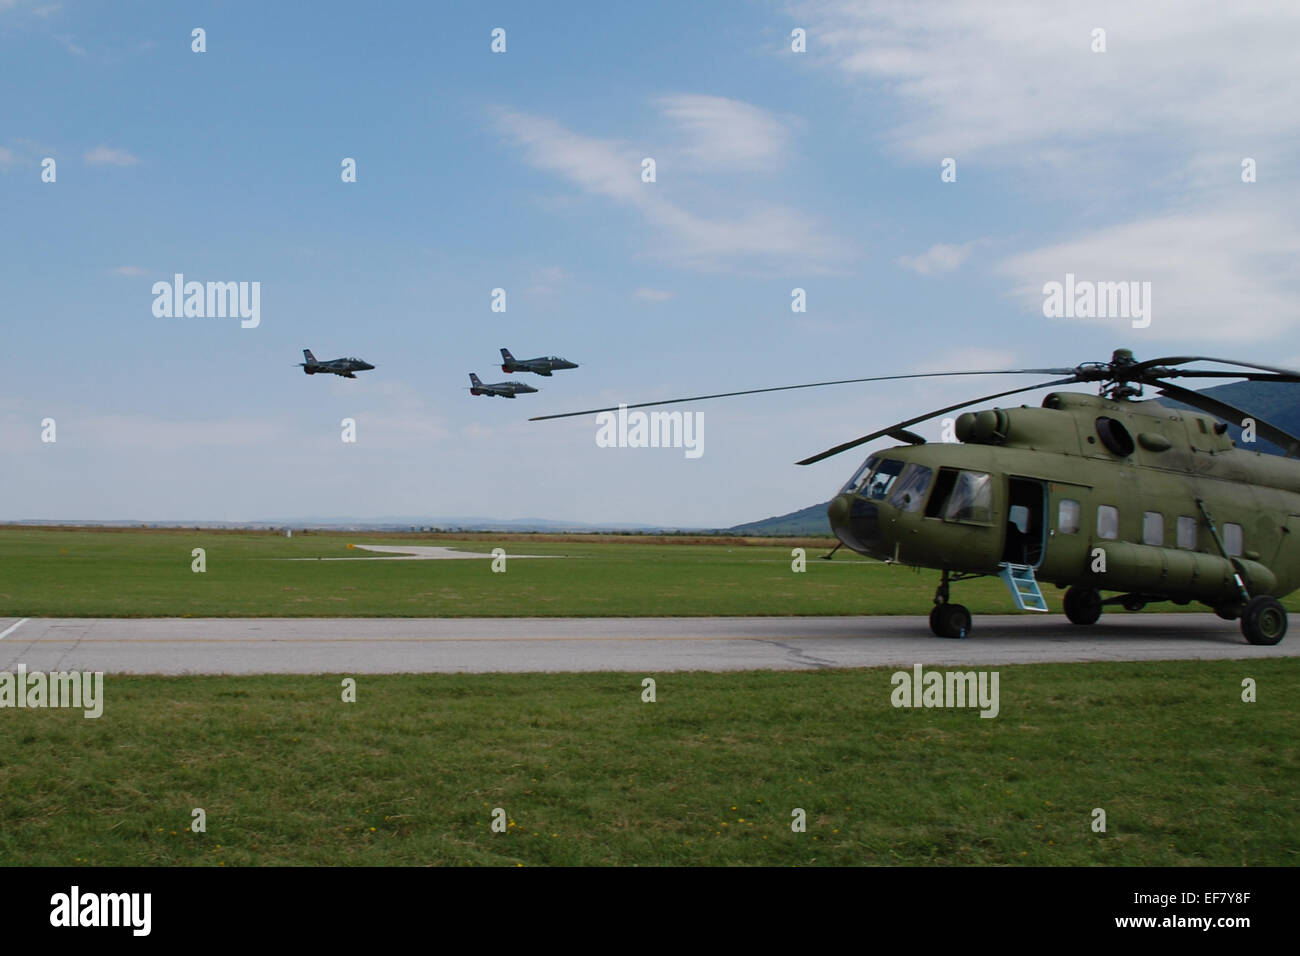 Group of military aircraft in flight over the helicopter in the air show. Stock Photo